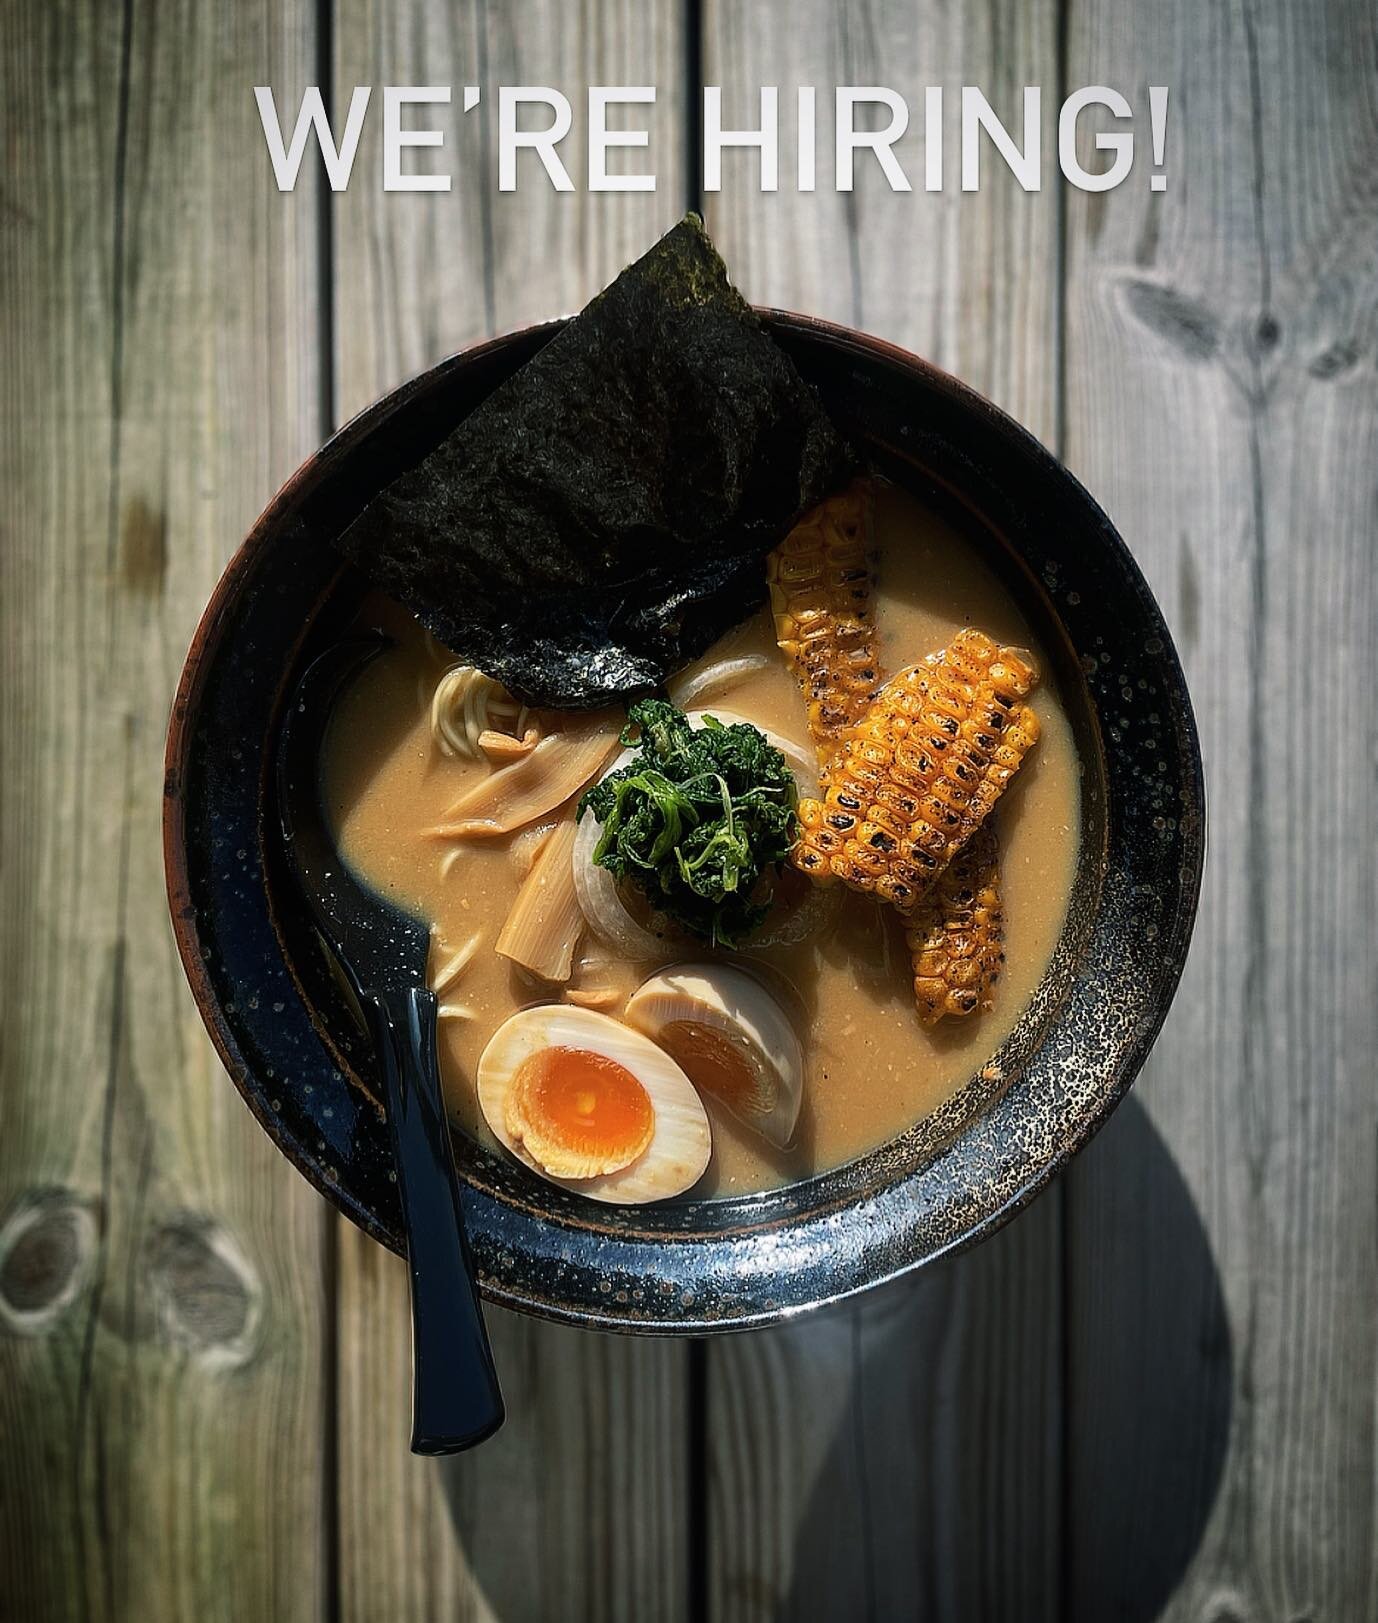 Hi,
Come work with us!

We are now looking to grow our kitchen team.
Experience is required - Bonus if you worked with asian food before.

Join our team. Send your cv to staff@airamen.se